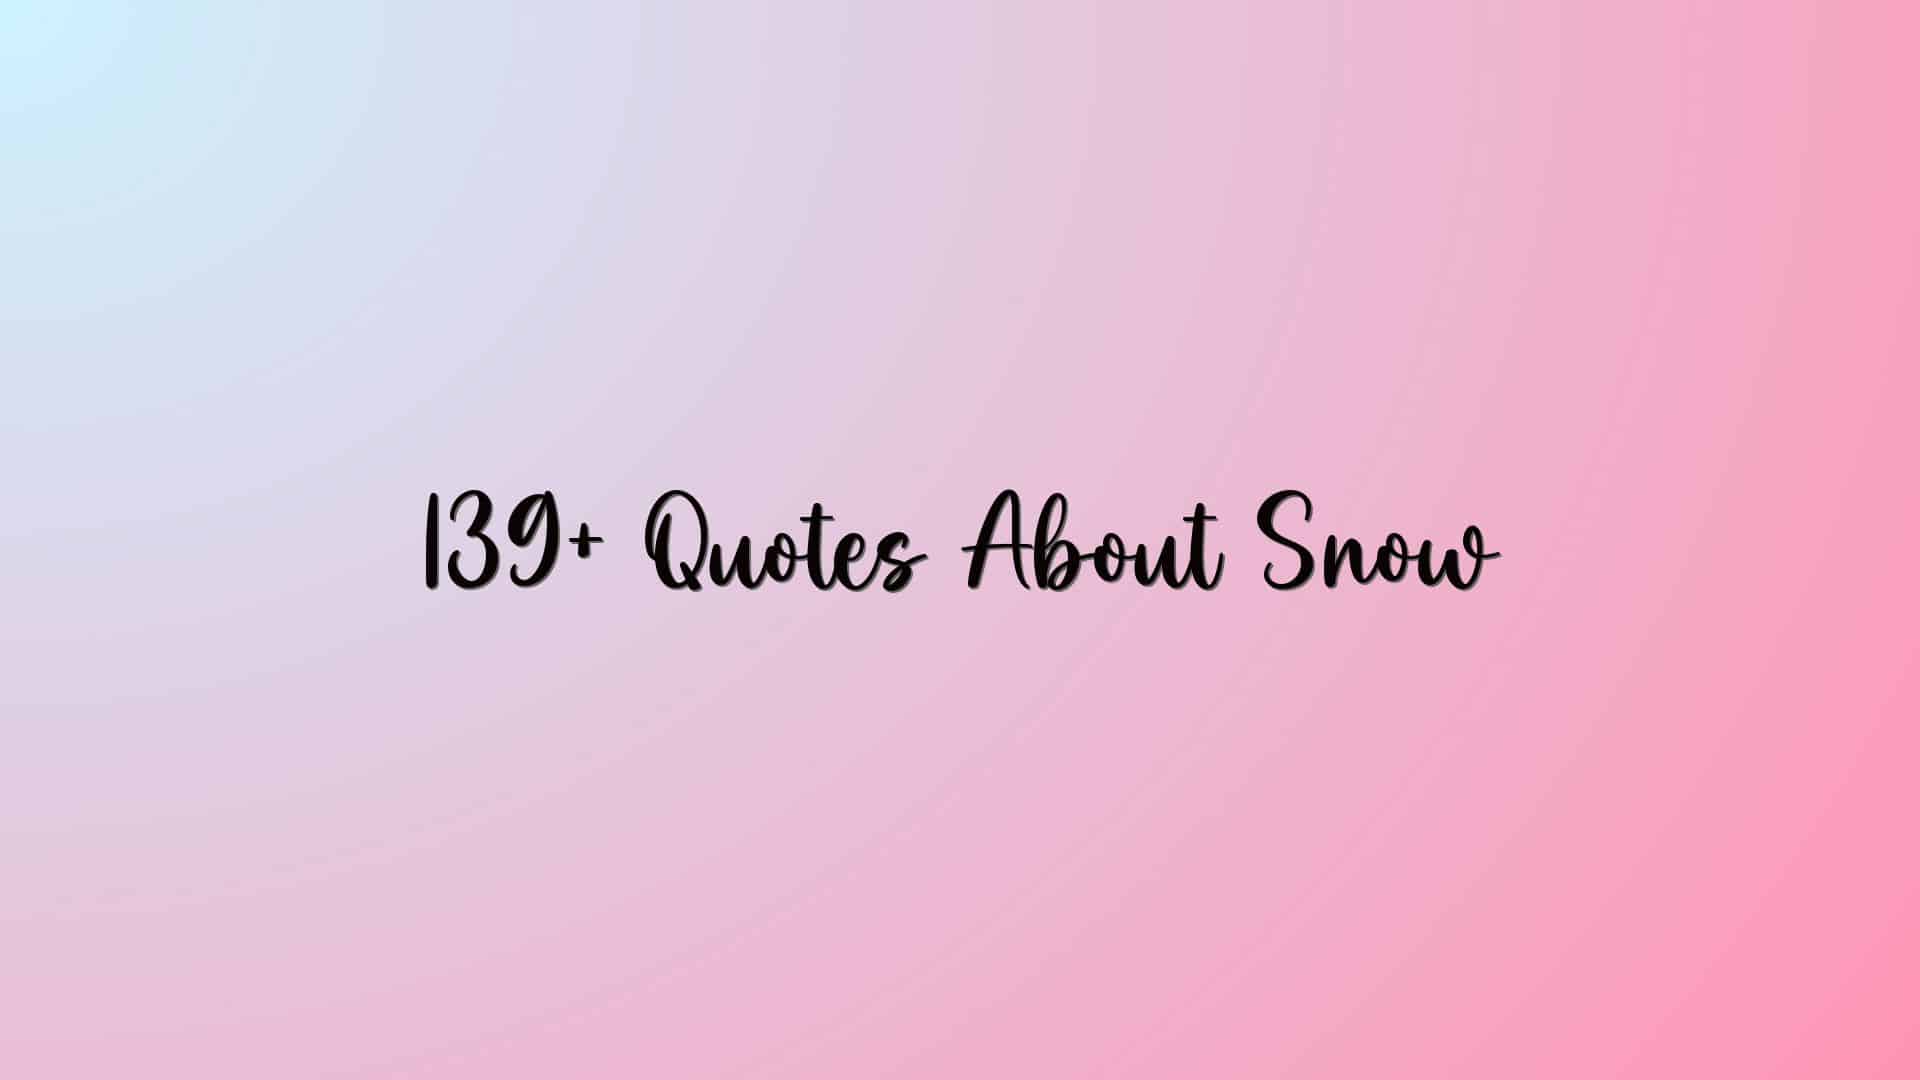 139+ Quotes About Snow